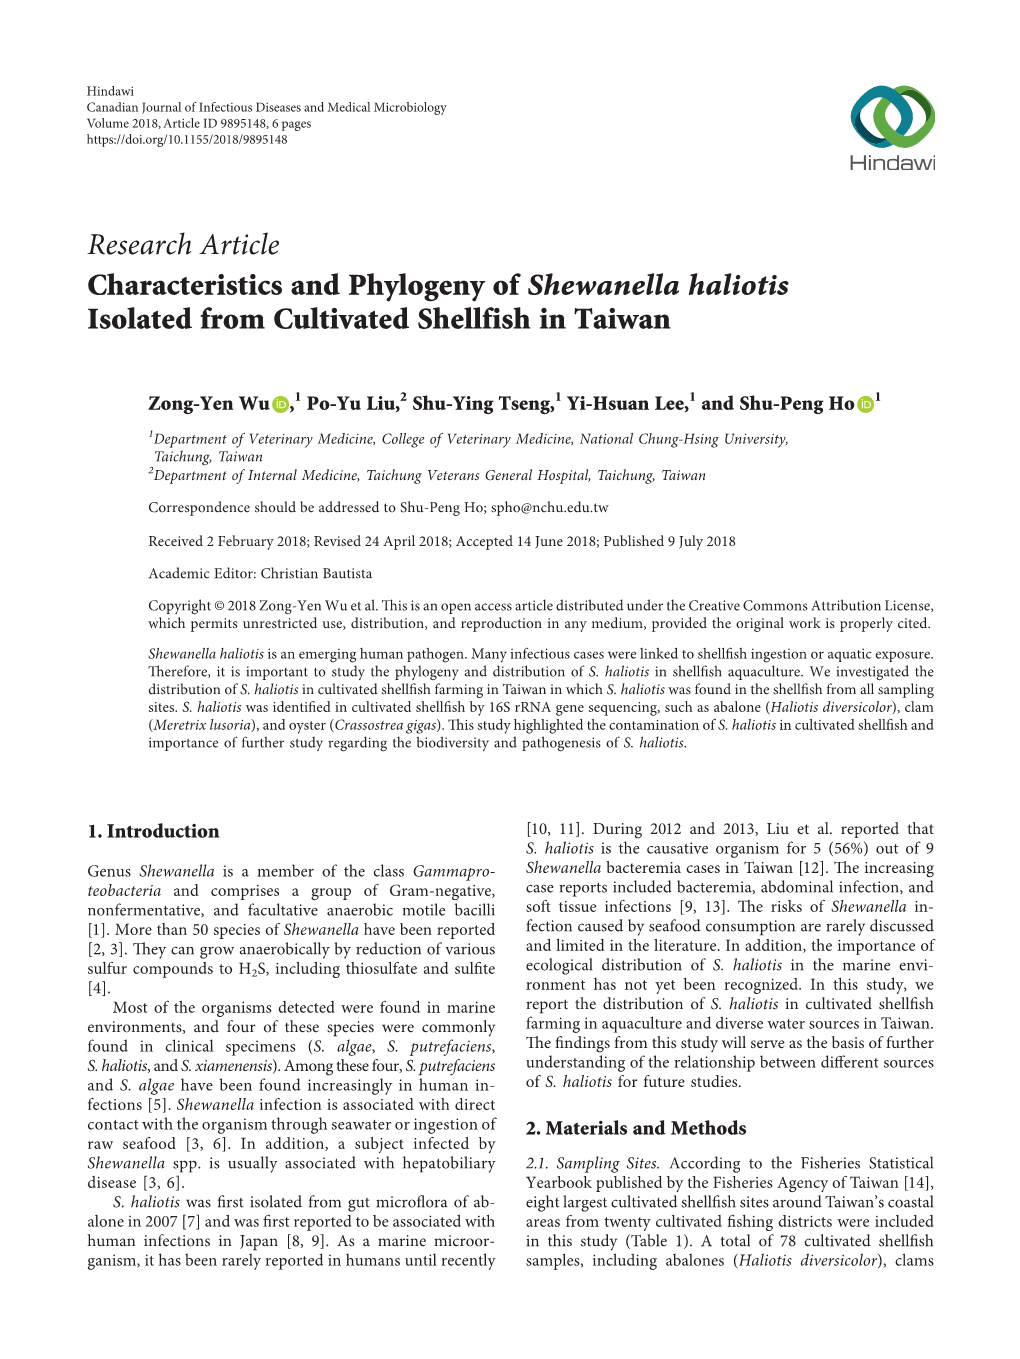 Research Article Characteristics and Phylogeny of Shewanella Haliotis Isolated from Cultivated Shellfish in Taiwan